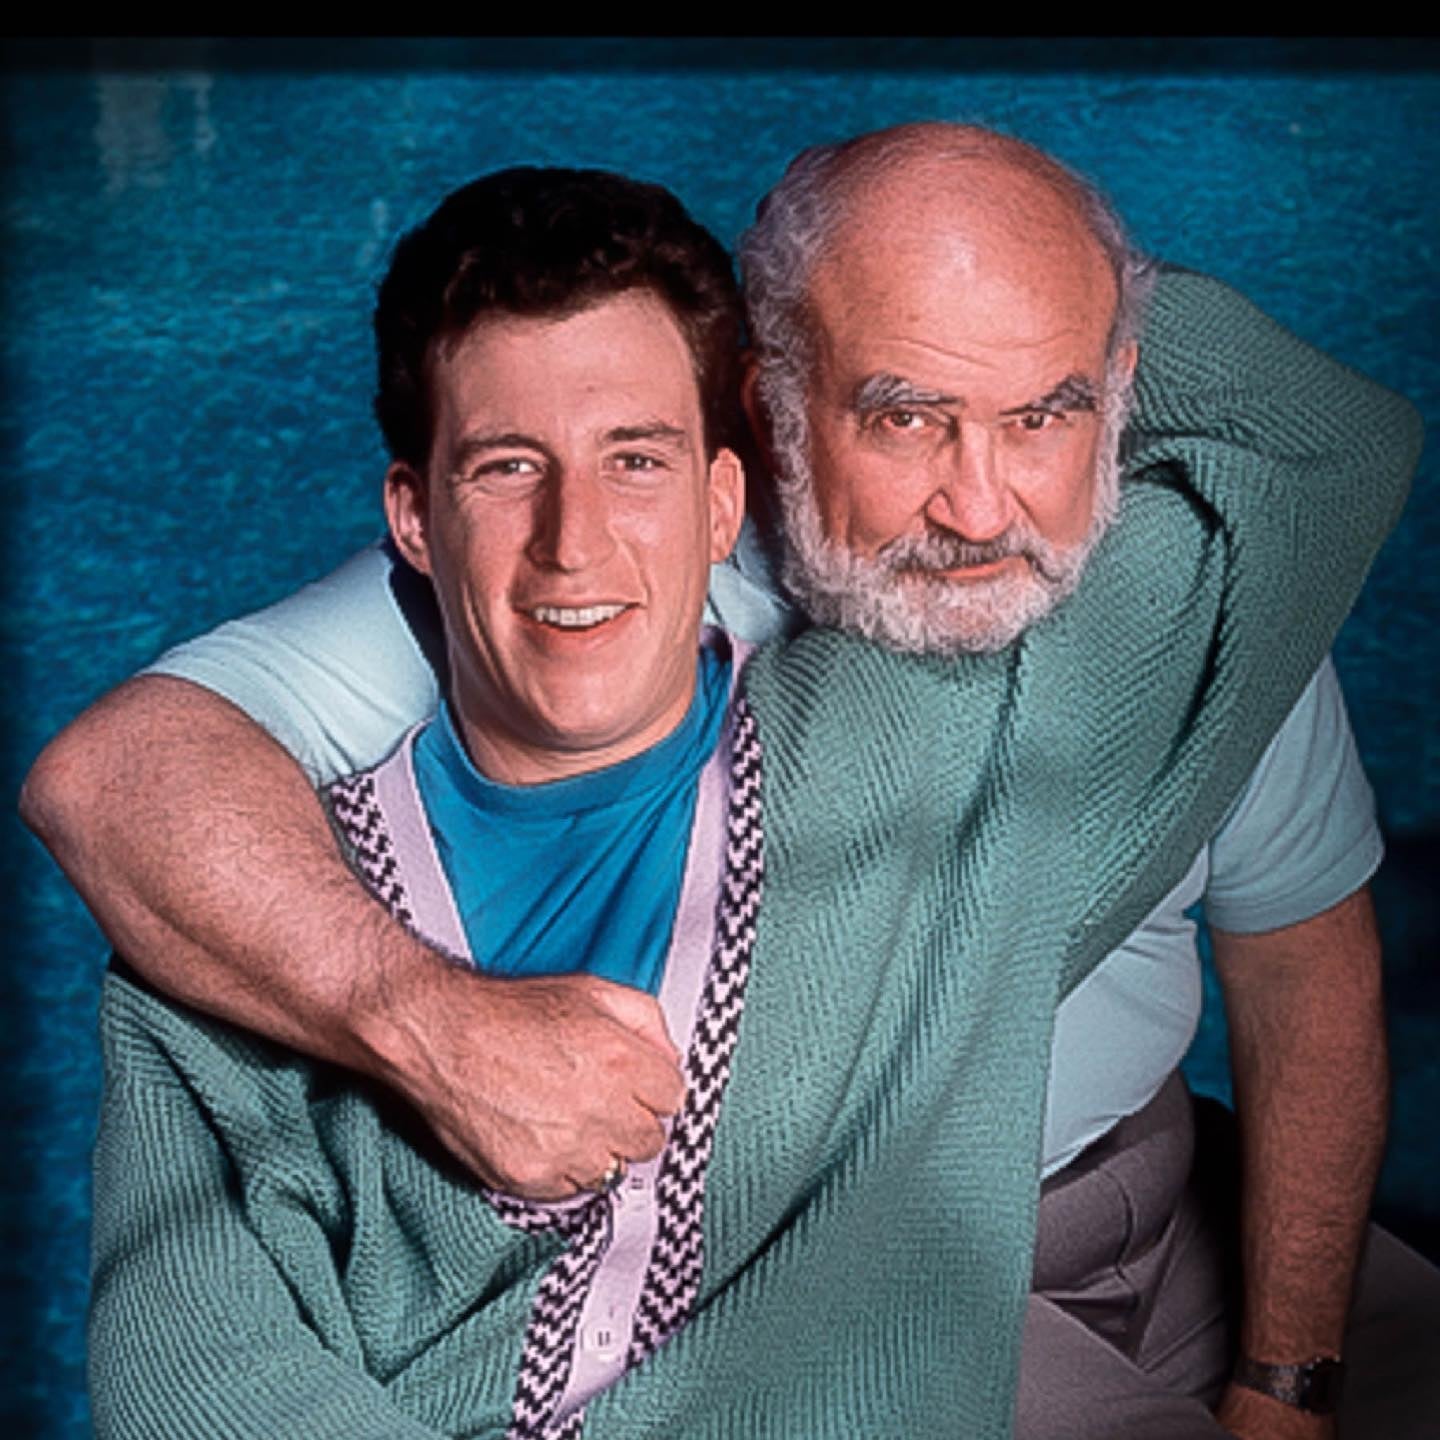 Matthew Asner in a blue-green posing with his father in a light blue t-shirt.